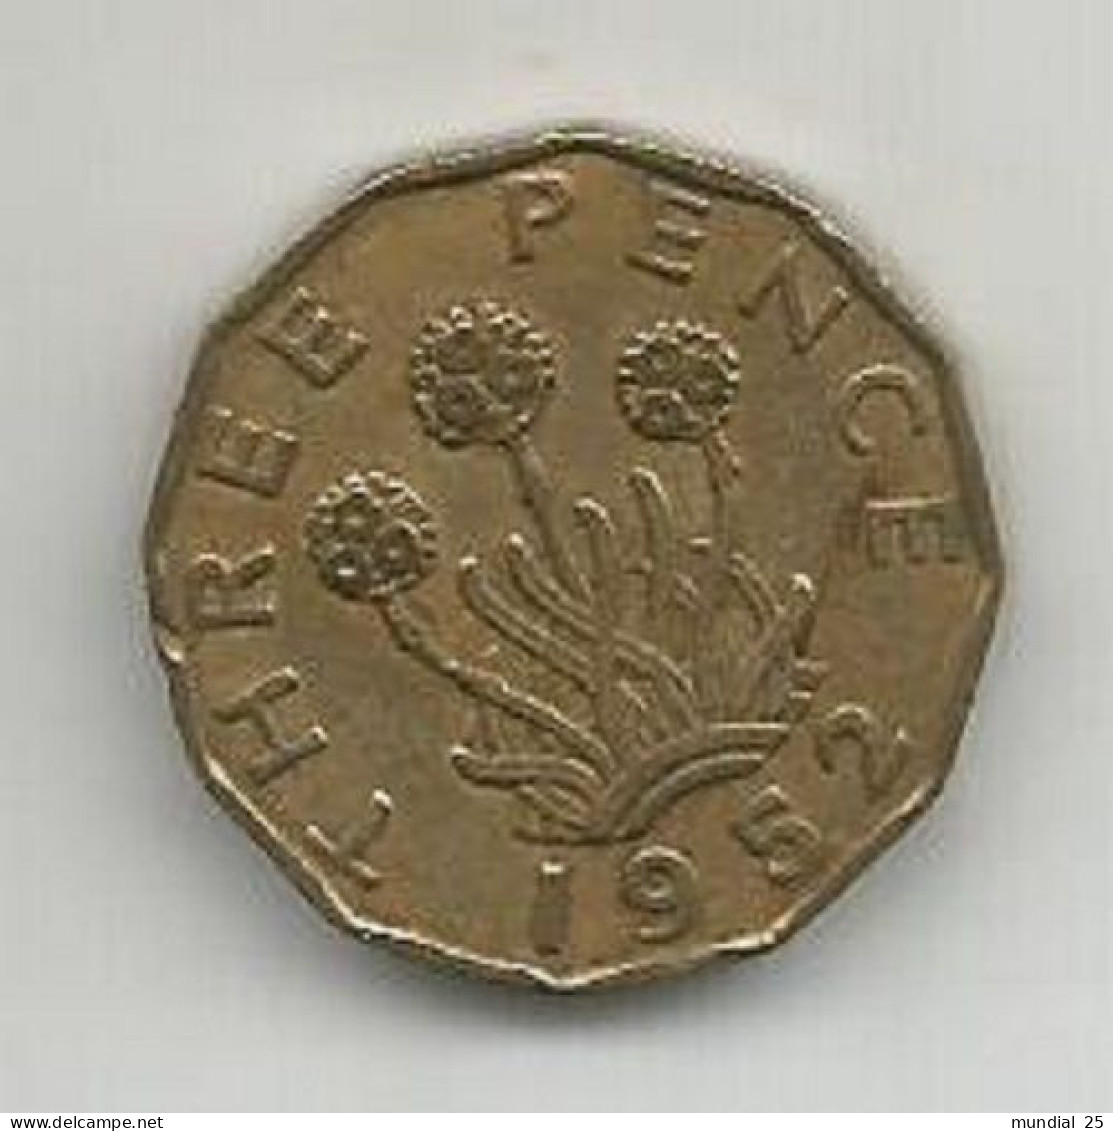 GREAT BRITAIN 3 PENCE 1952 - F. 3 Pence